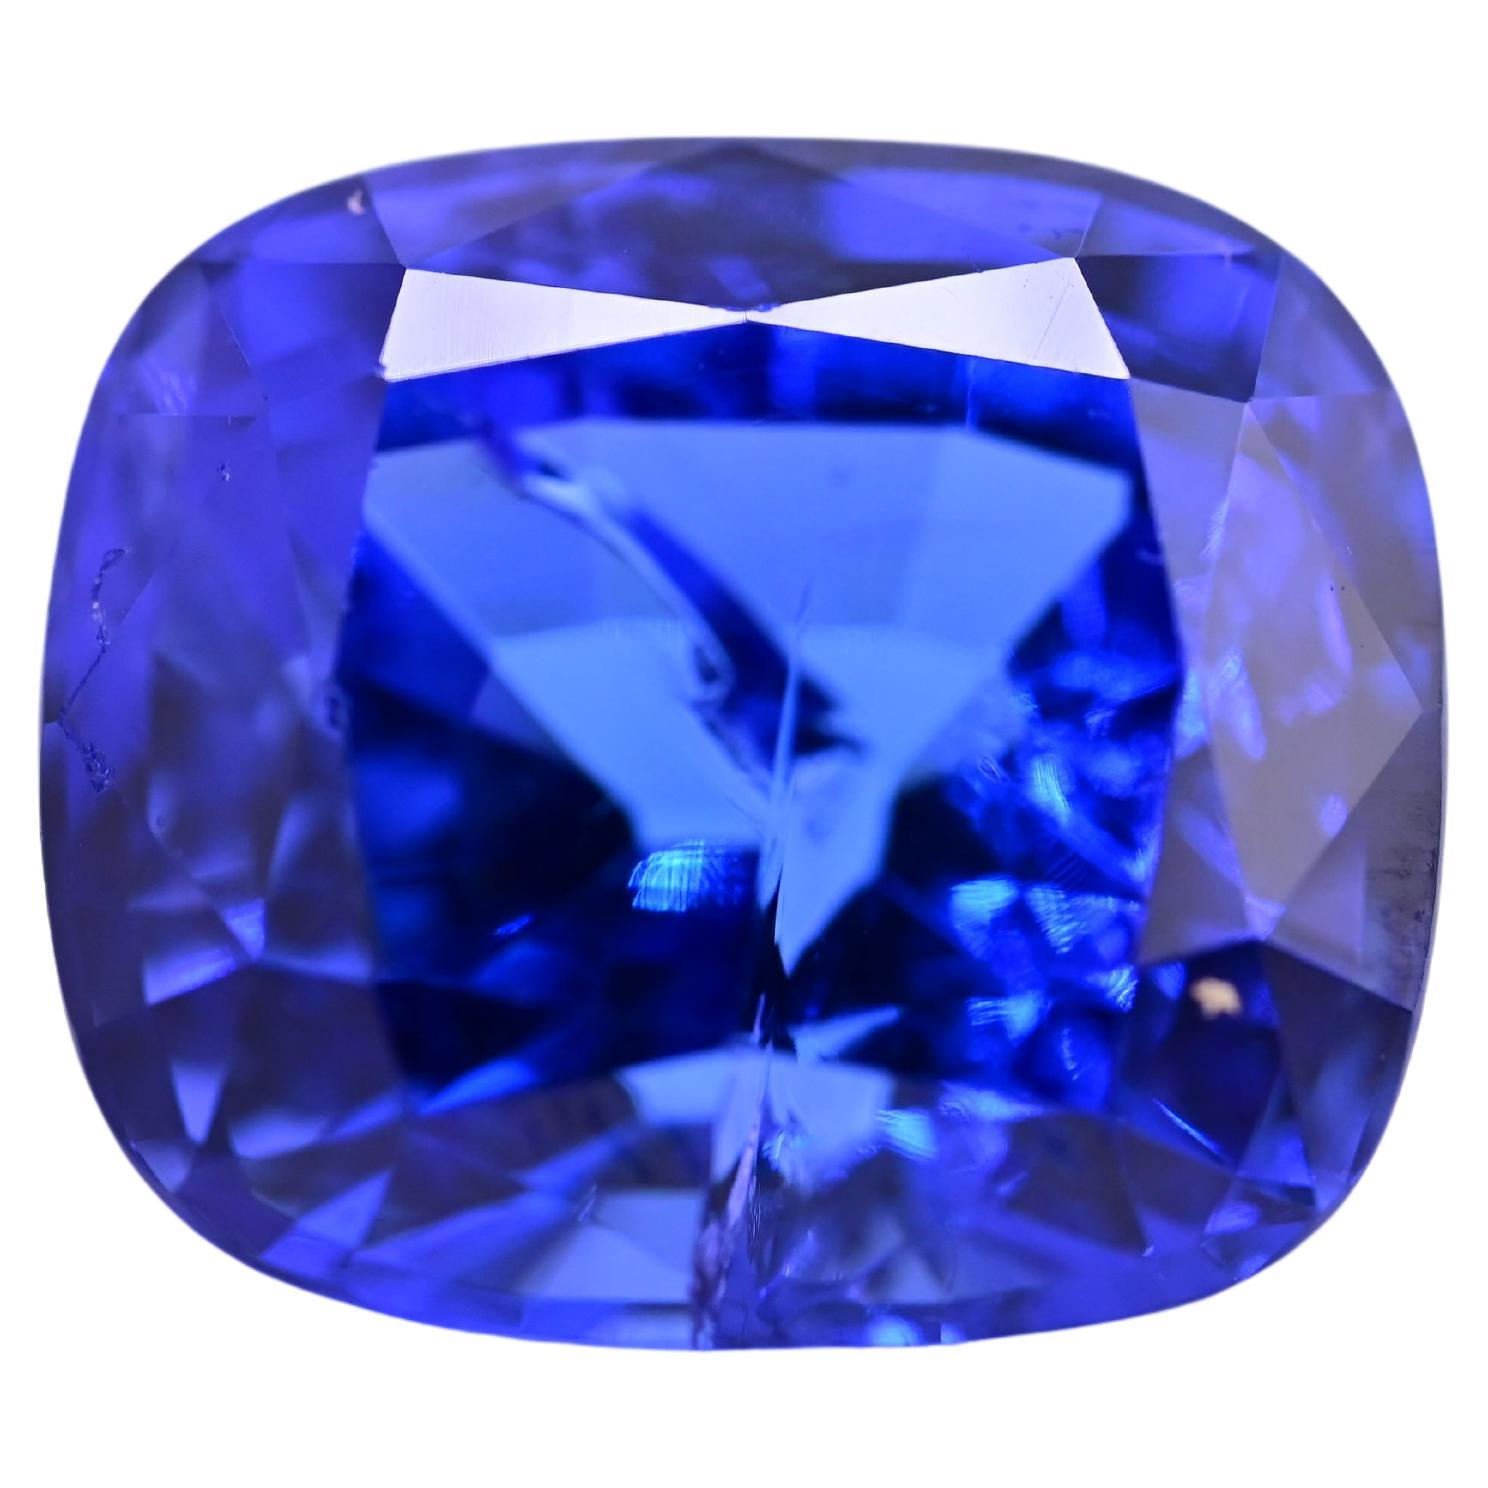 Exceptional Vivid Tanzanite Loose Stone 11.01 Carats GIA Certified For Sale